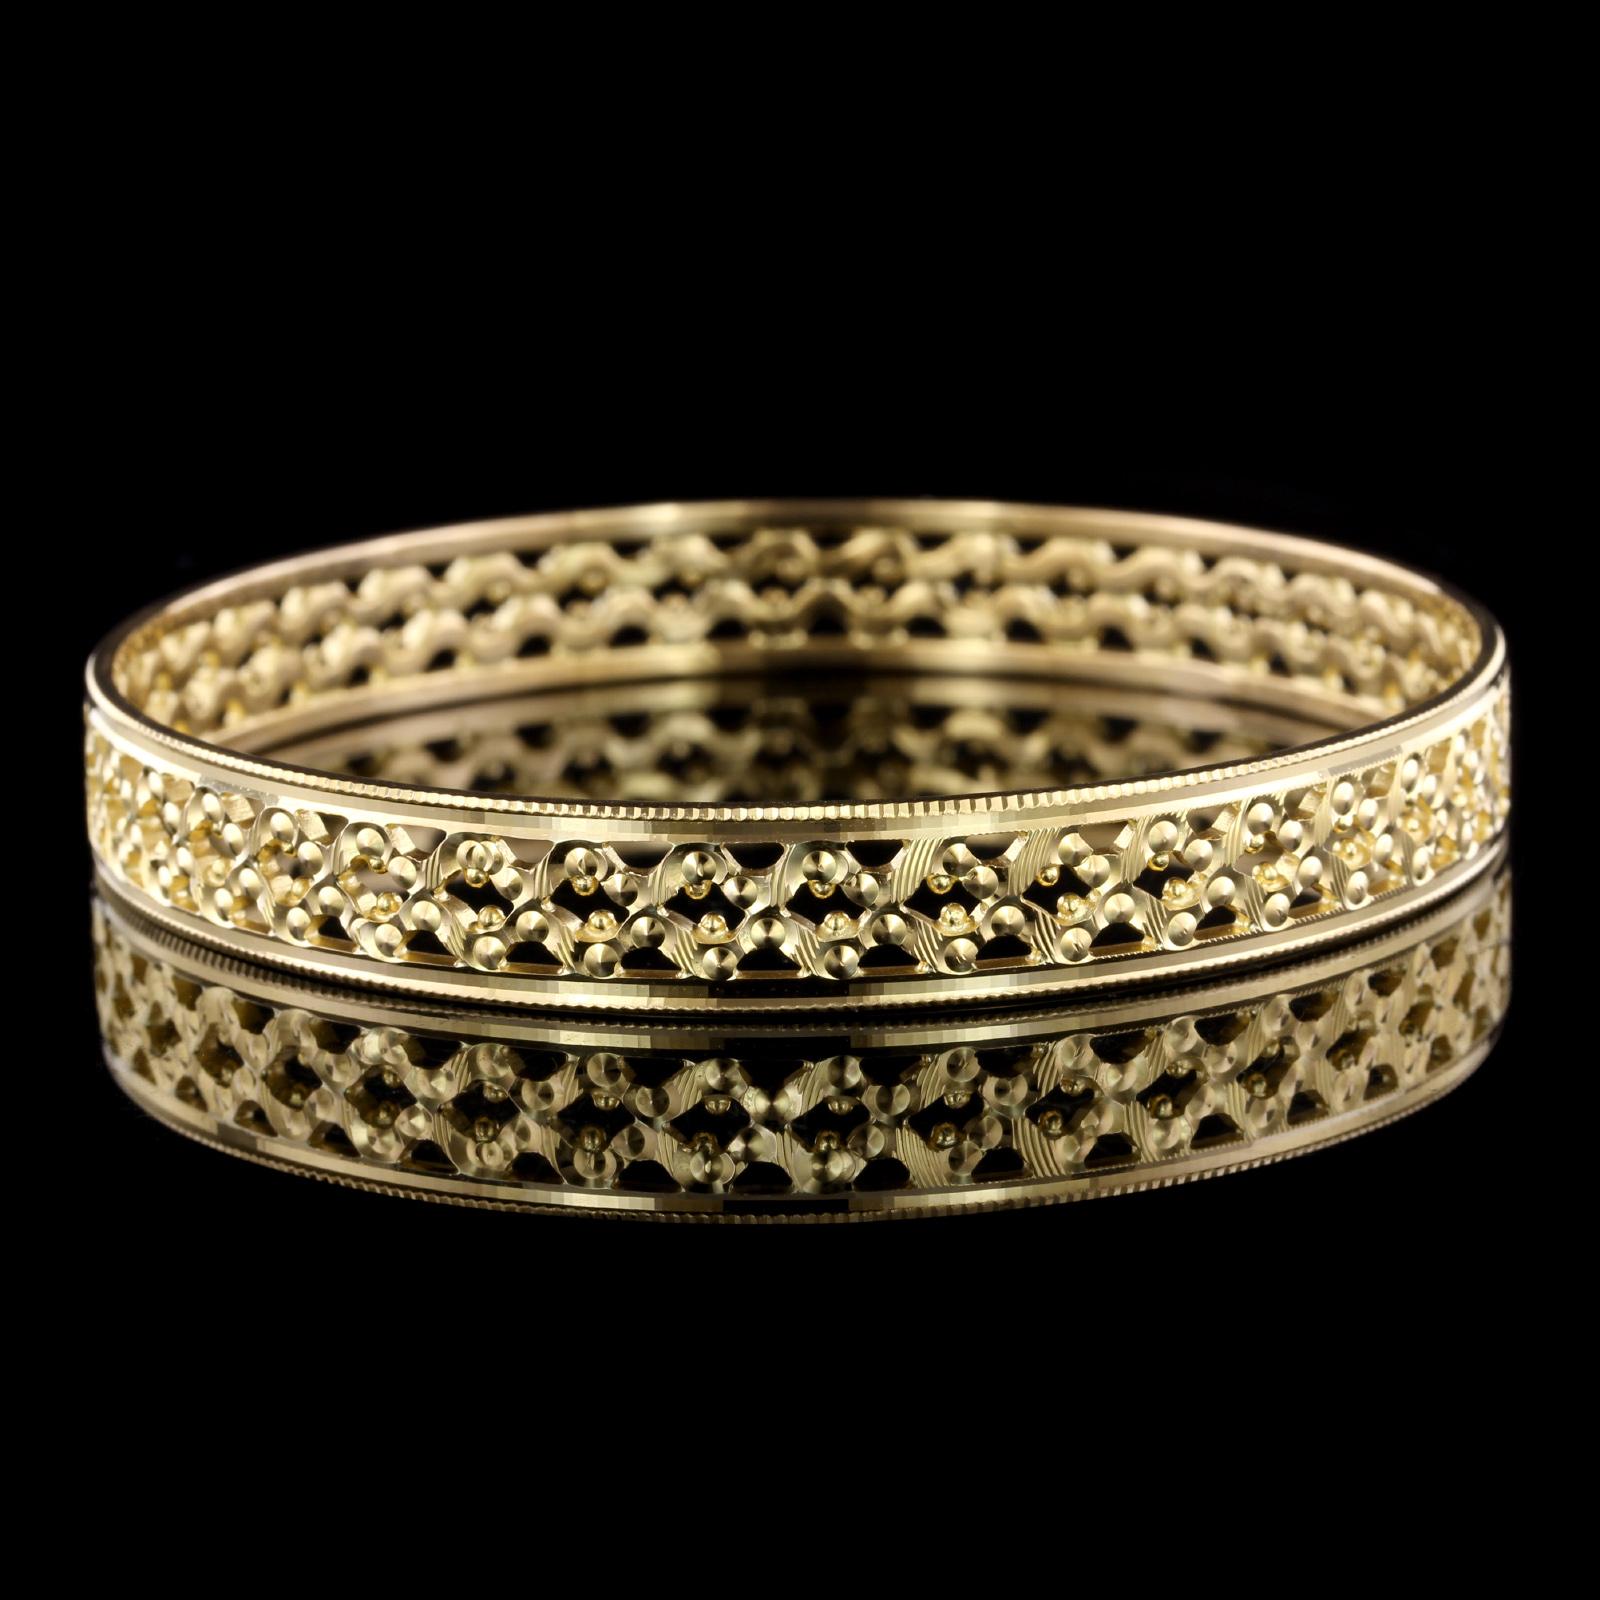 22K Yellow Gold Bangle. The bracelet measures 9.25mm. wide, interior
circumference 7 3/4